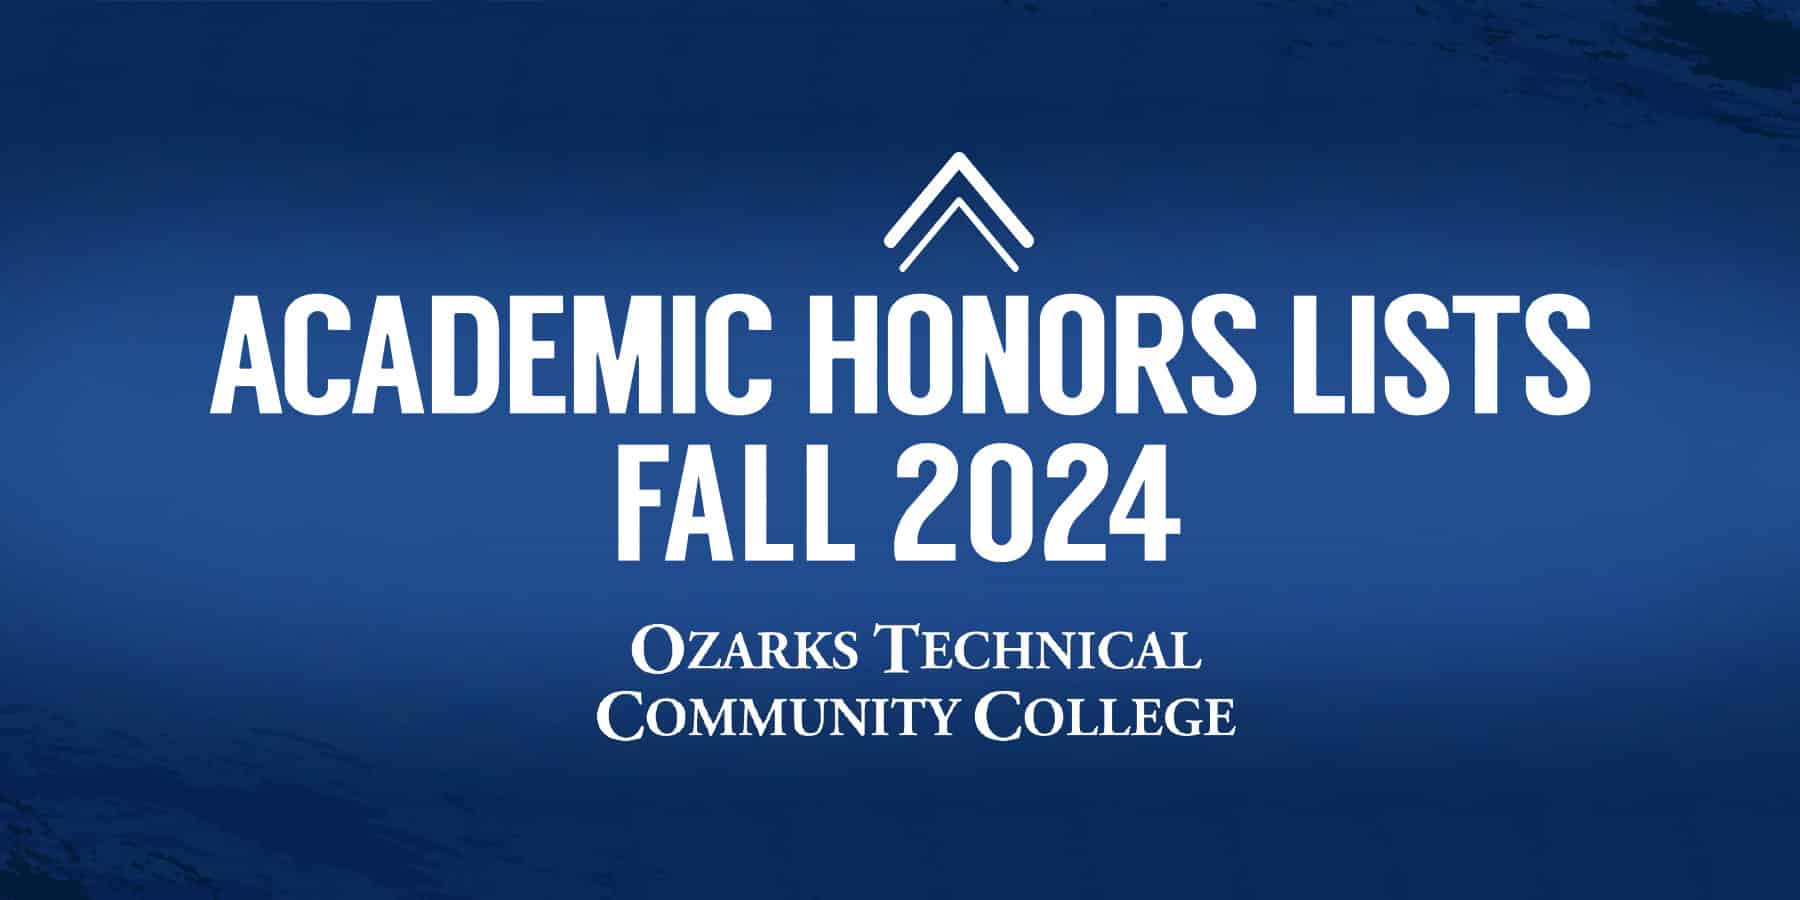 Academic Honors List of Fall 2024 News and Information